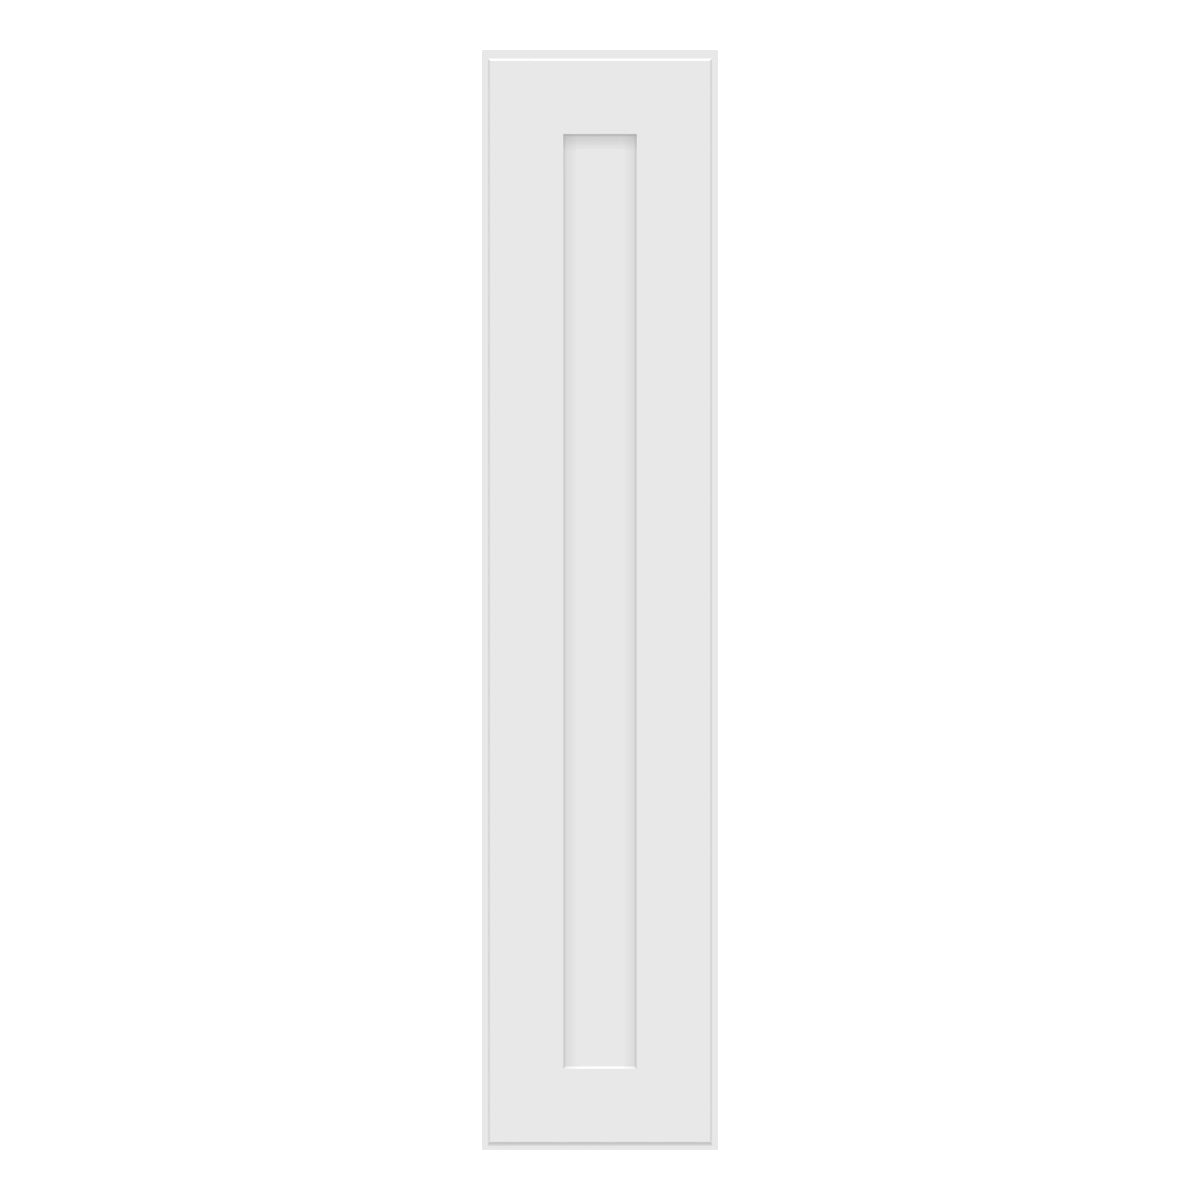 Craft Cabinetry Shaker White 9"W x 42"H Wall Cabinet